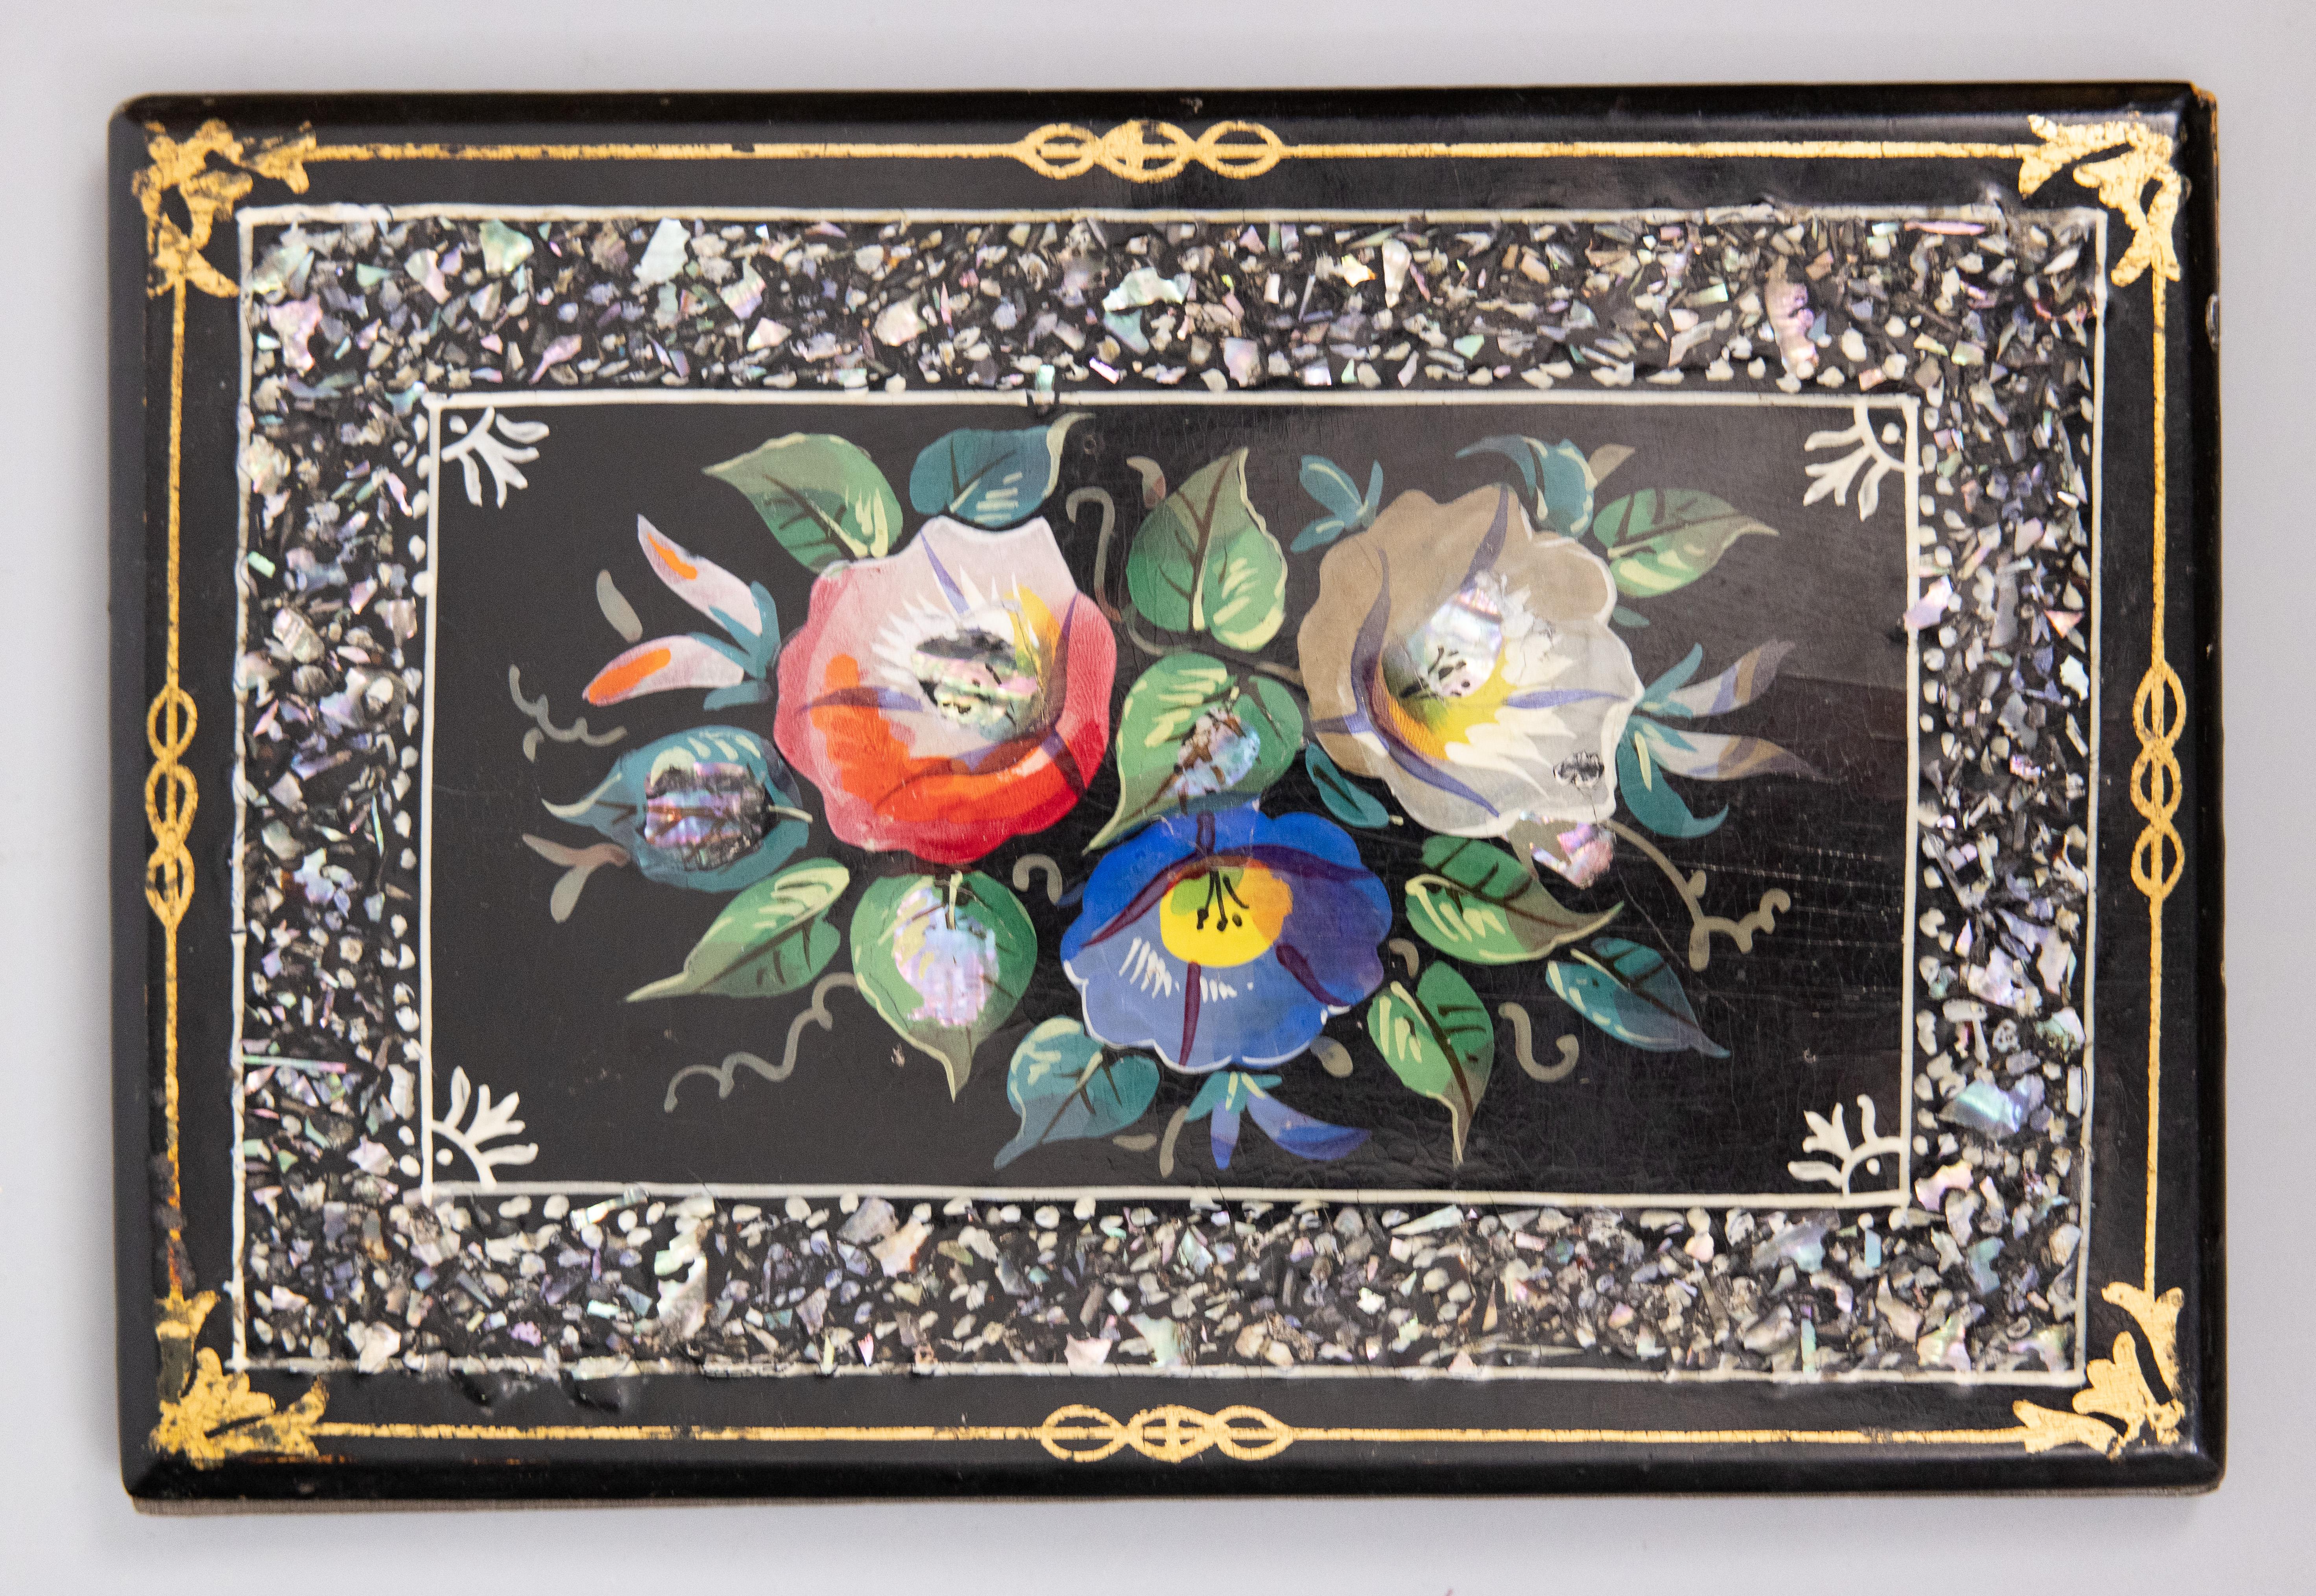 A lovely antique 19th-Century English black lacquer papier mâché folio or desk blotter. This fine folio has a hand painted floral design with inlaid mother of pearl details and a gilt decorative border.

Dimensions
6